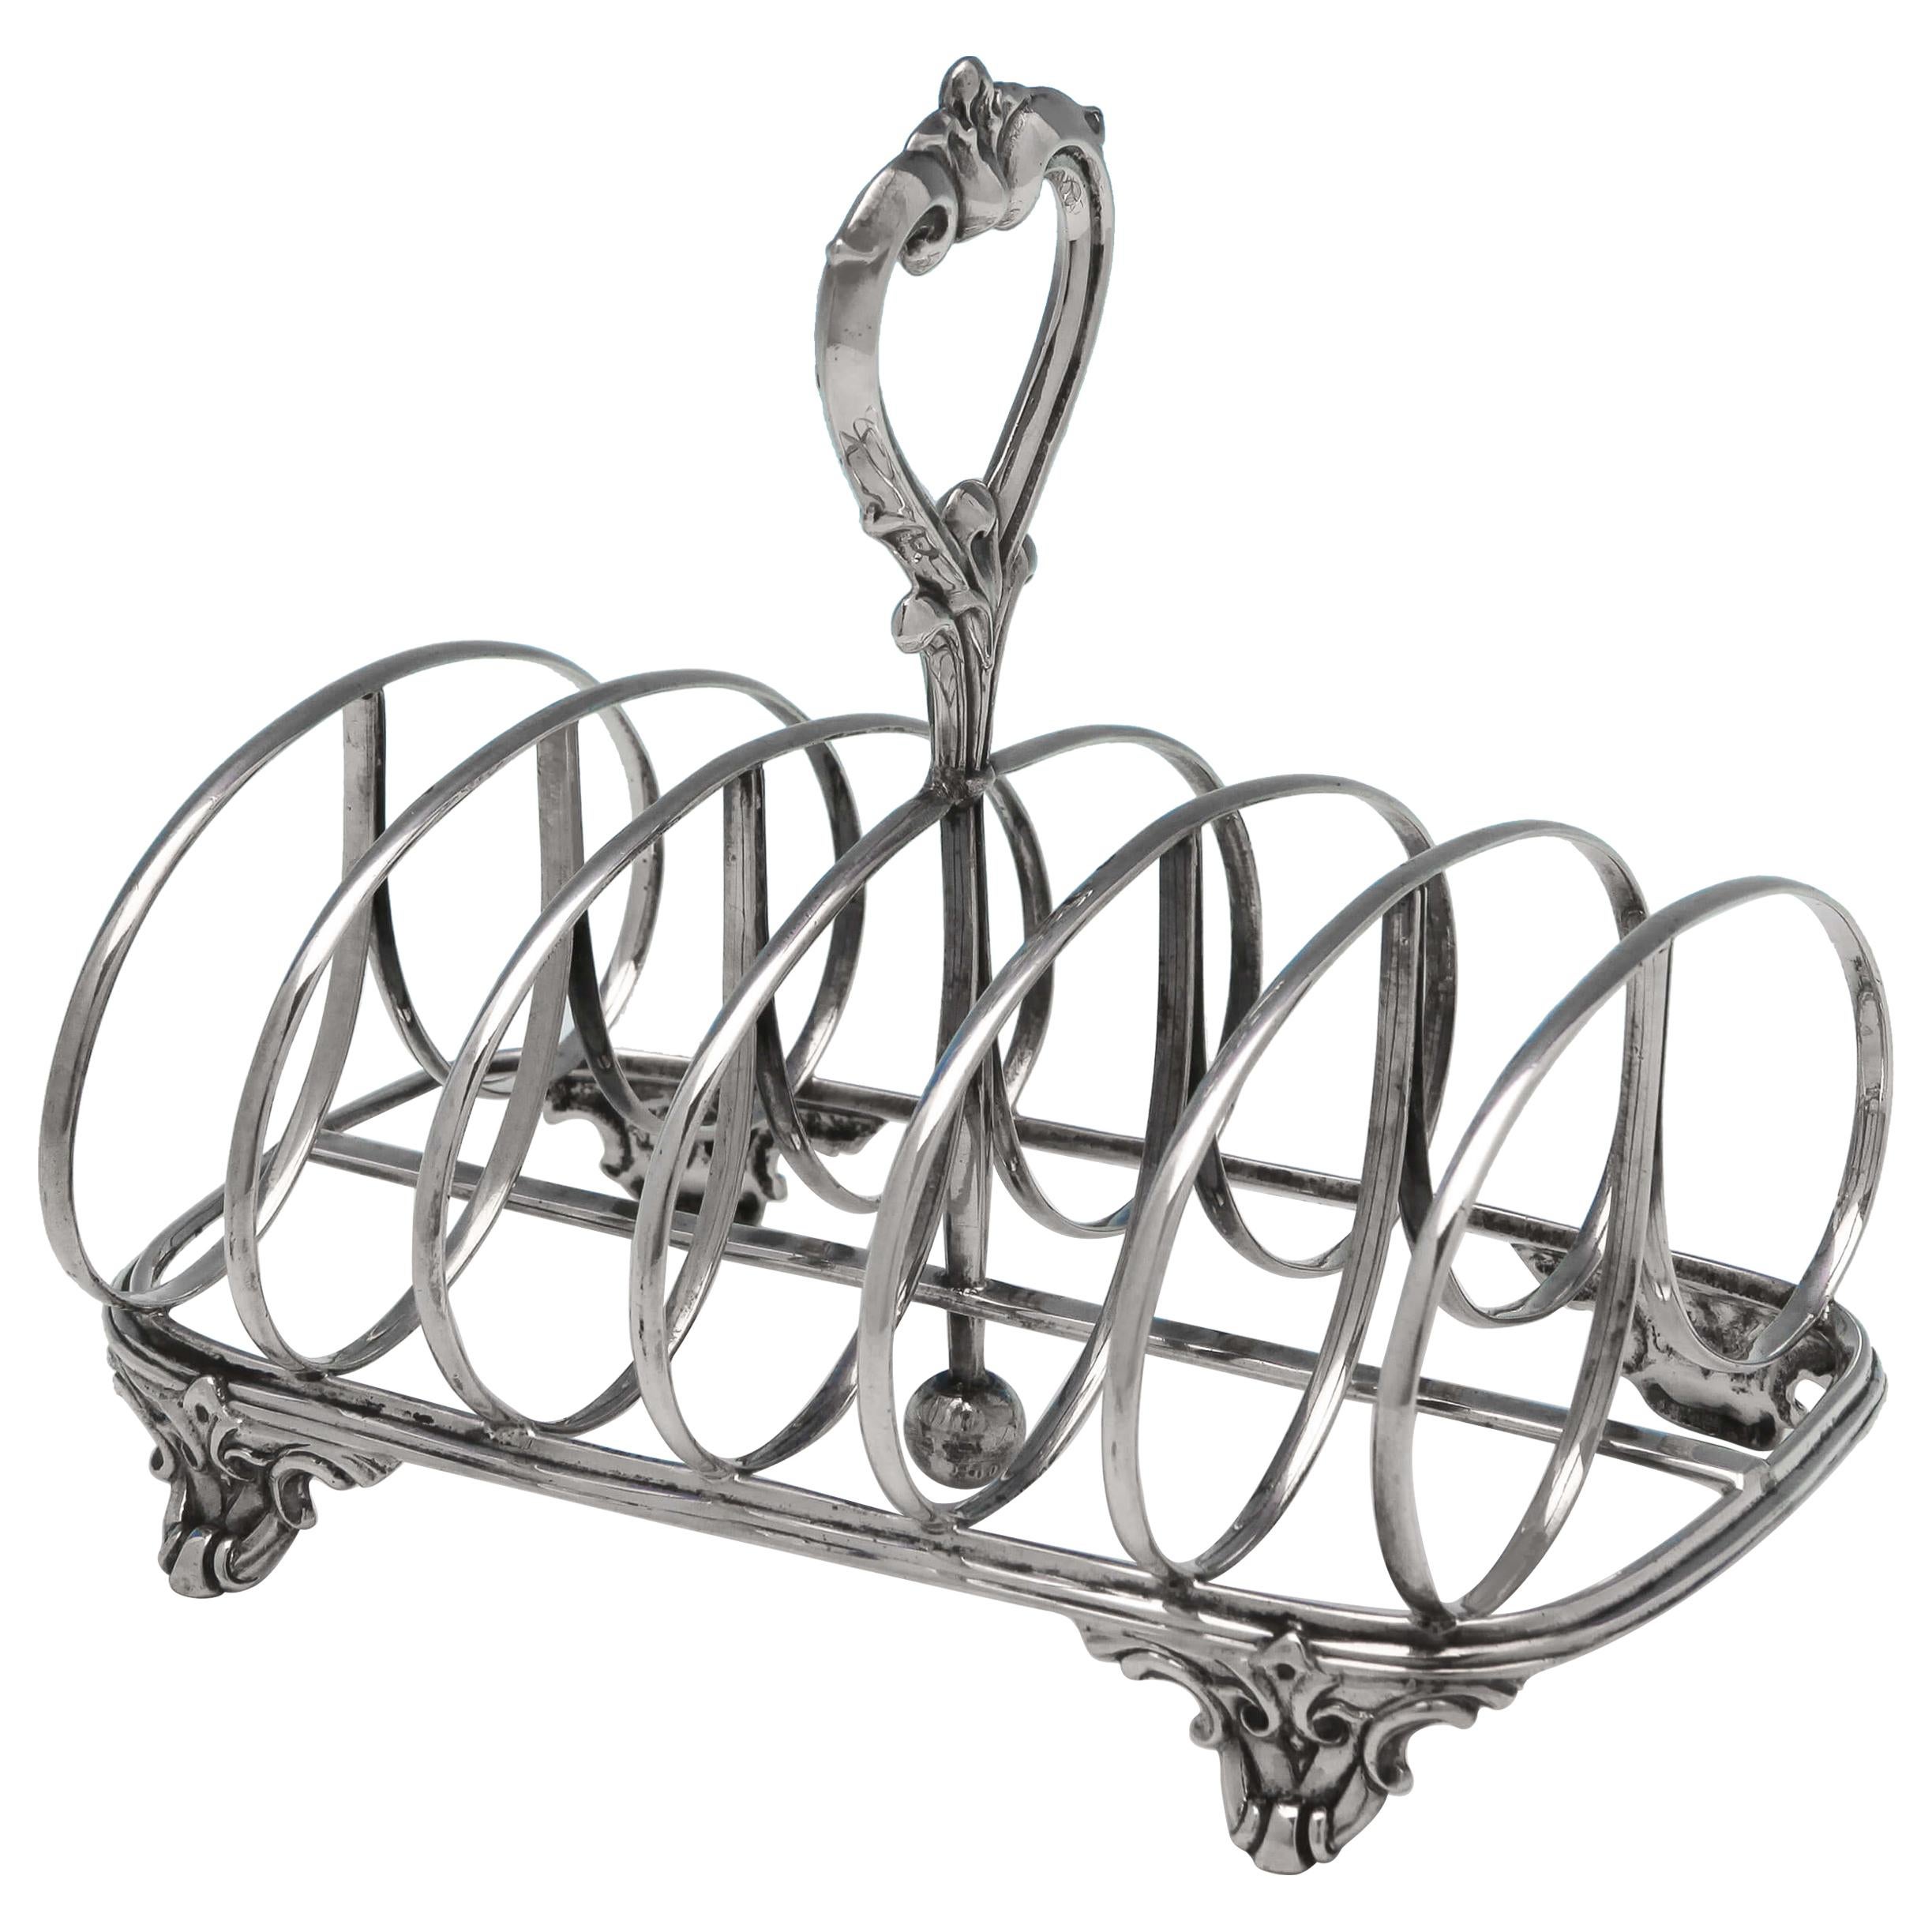 19th Century Victorian Antique Sterling Silver Toast Rack by William Evans 1874